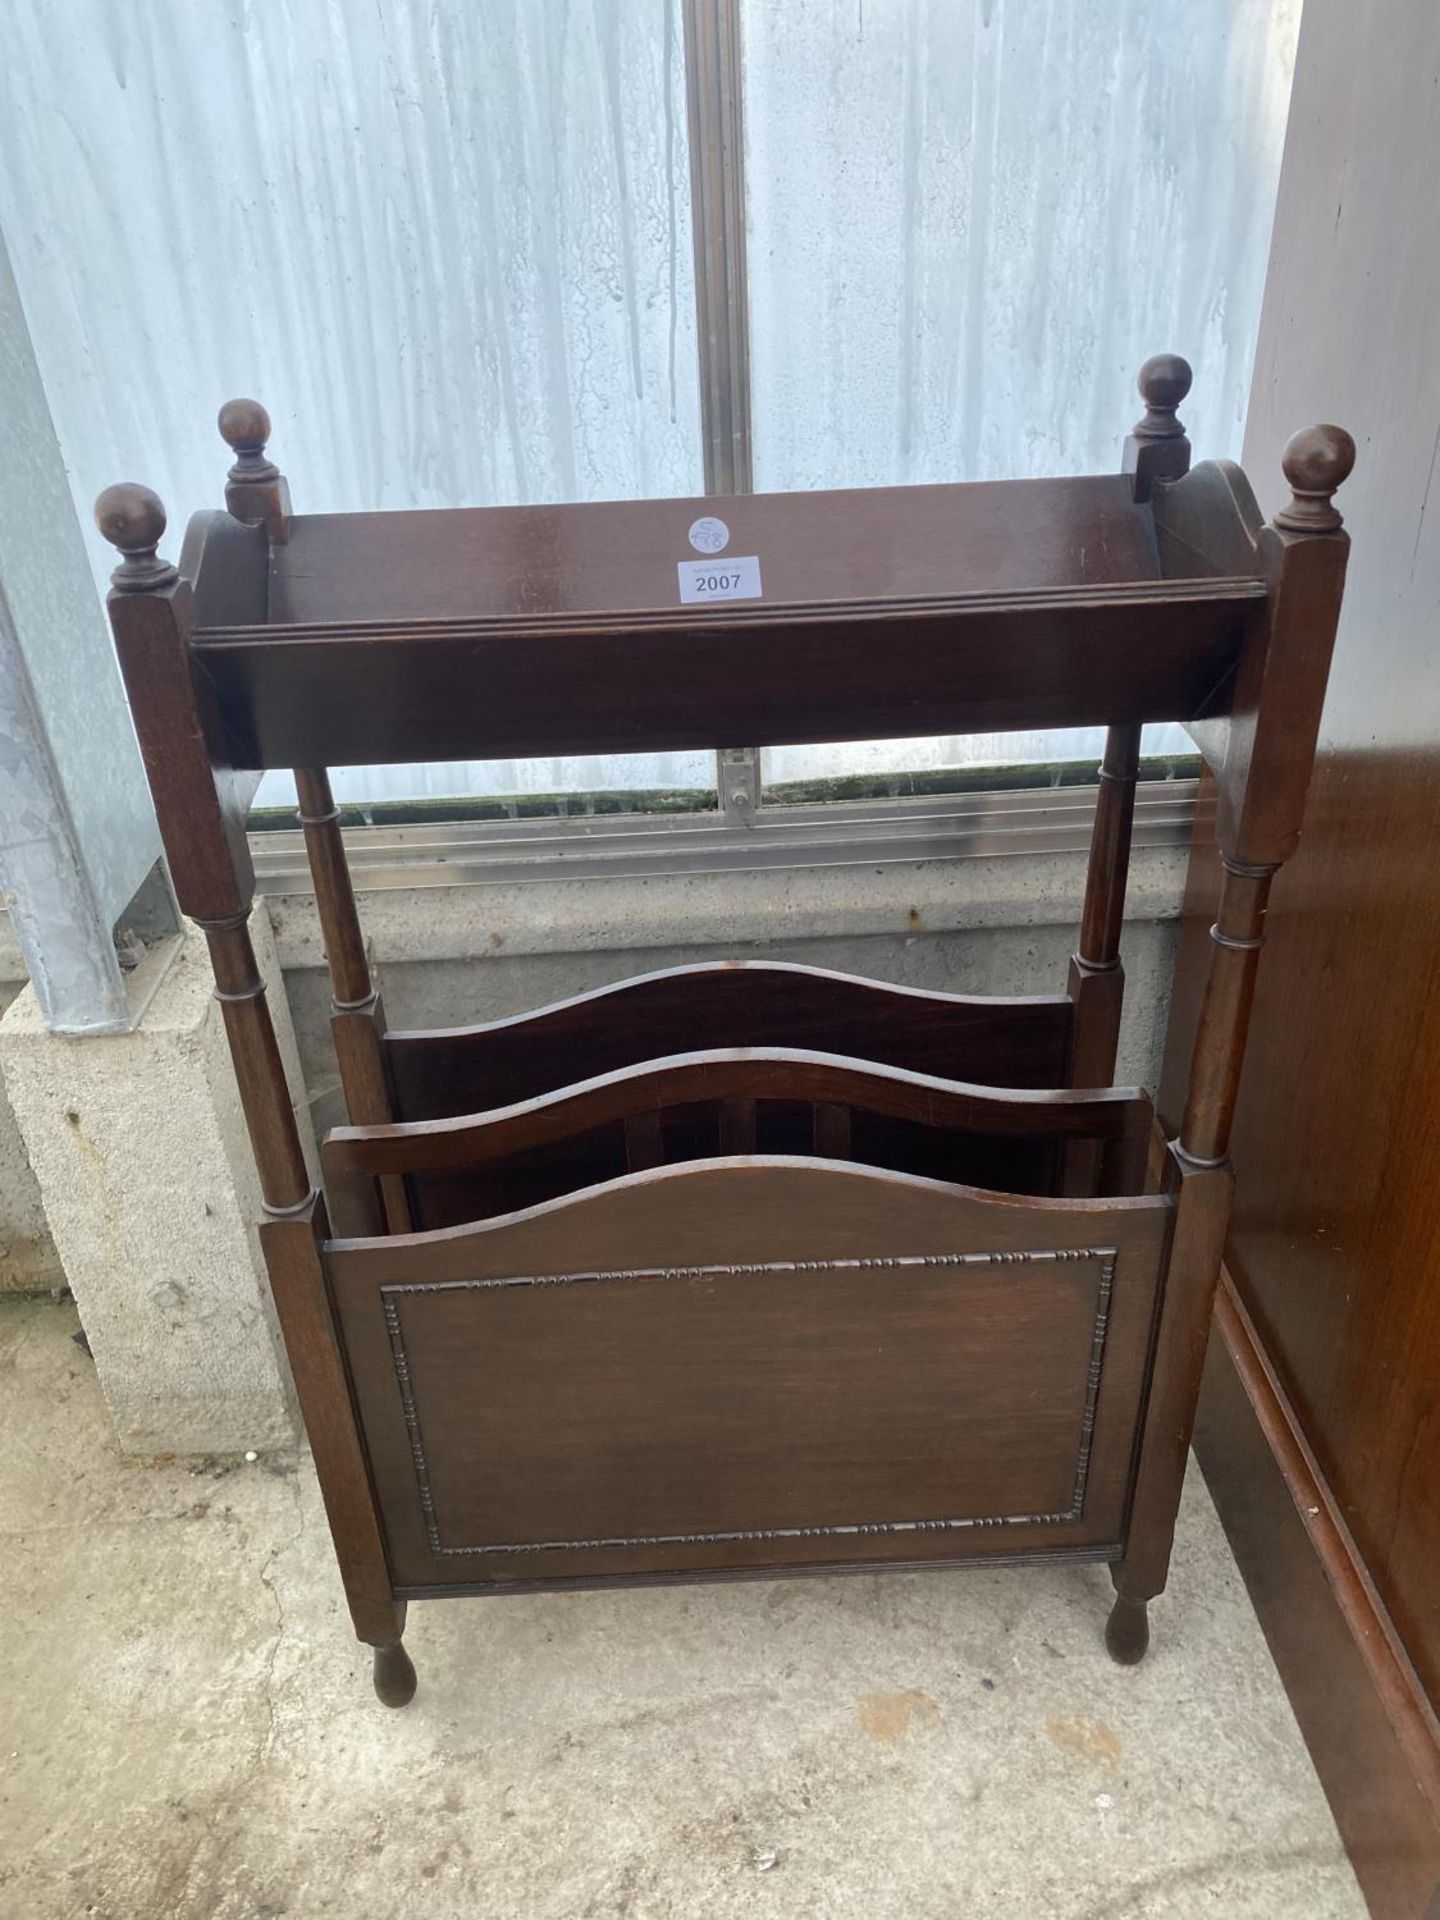 AN EARLY 20TH CENTURY MAHOGANY BOOK TROUGH/MAGAZINE RACK, 18" WIDE